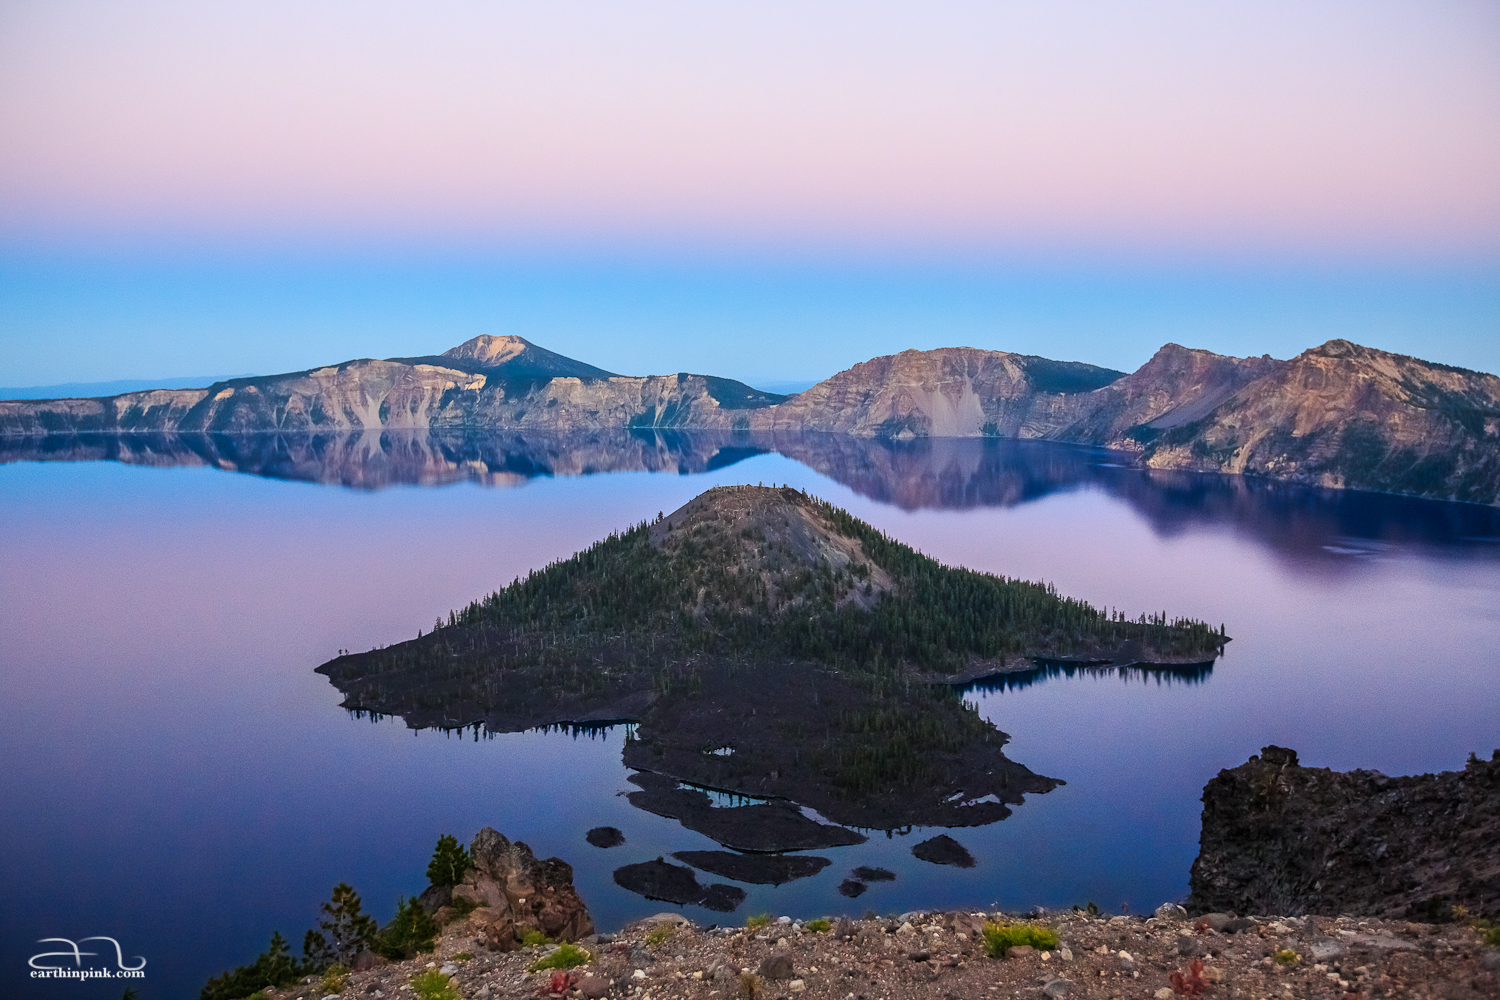 Colorful sunset over Crater Lake National Park, Oregon